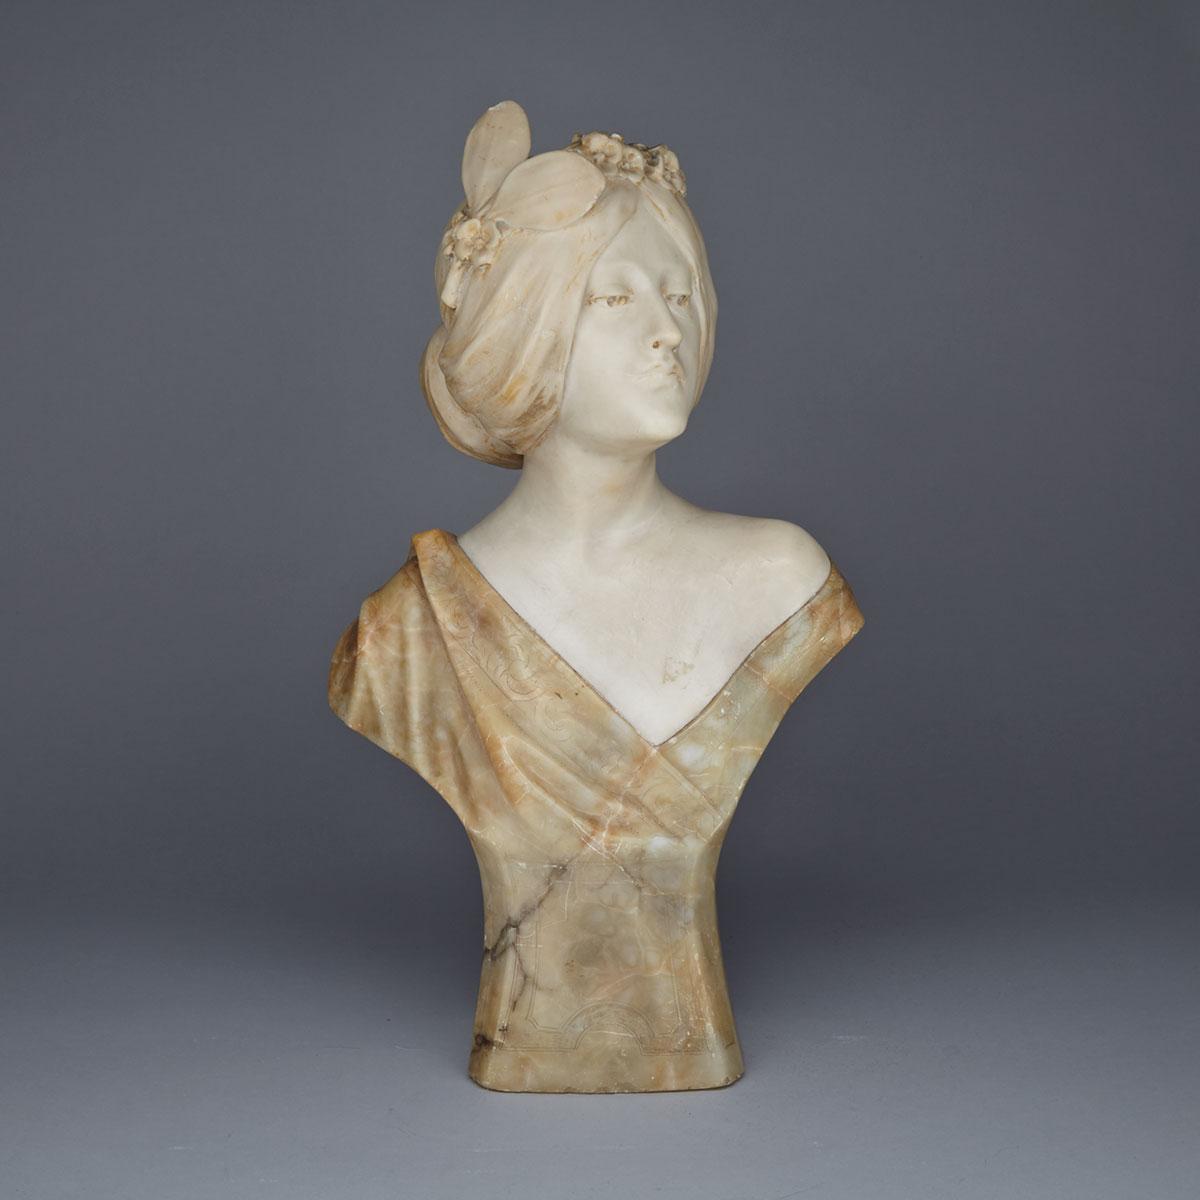 Italian Art Nouveau marble Bust of Young Woman, c.1890